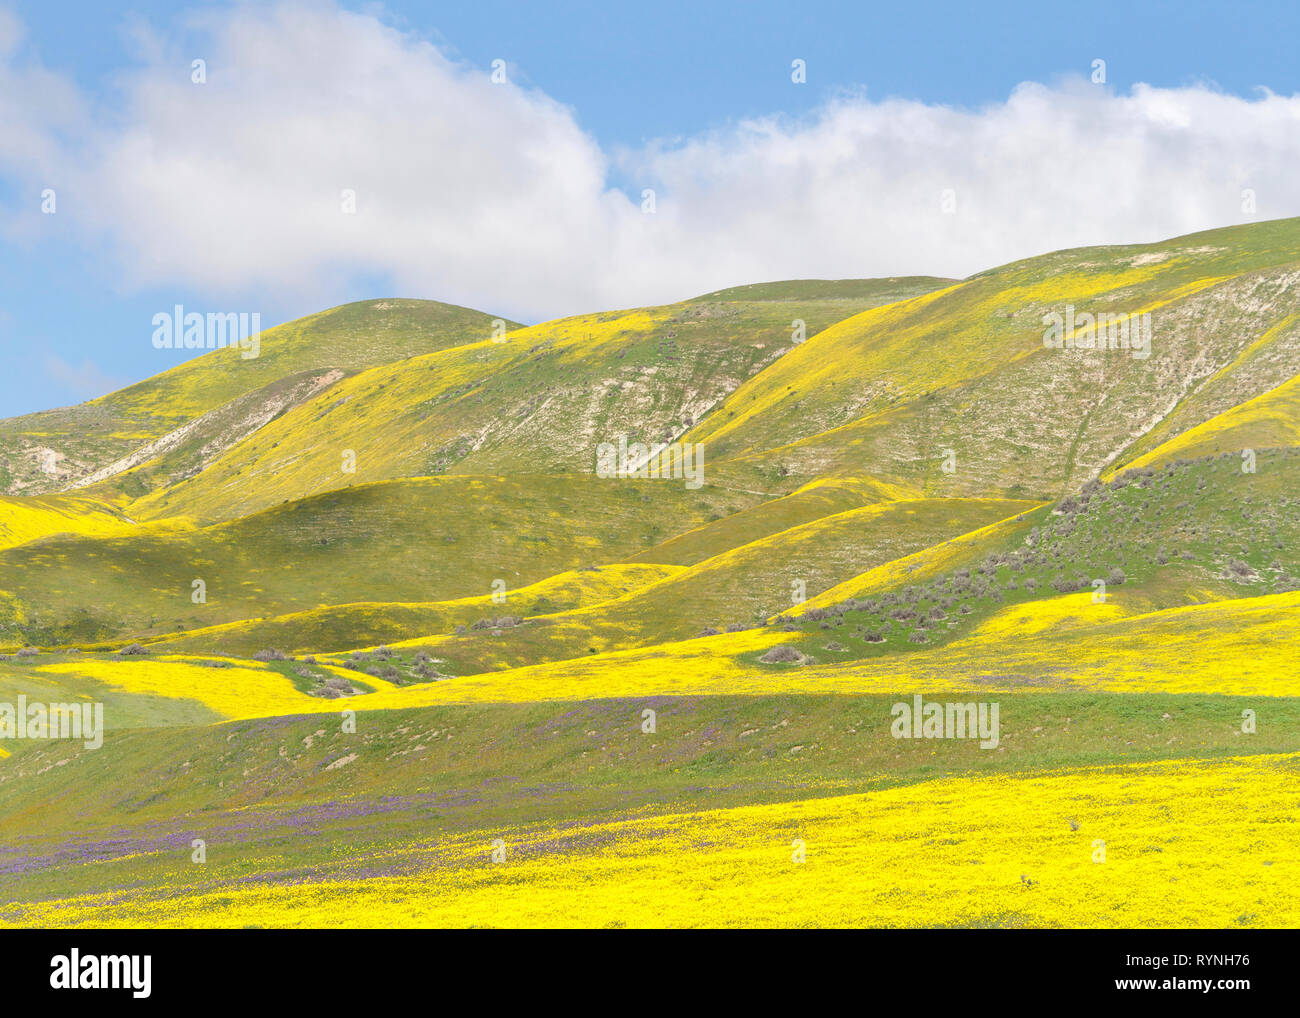 Hills around Santa Margarita, California, blooming vibrant yellow after weeks of heavy rain in the area. Super bloom. Stock Photo